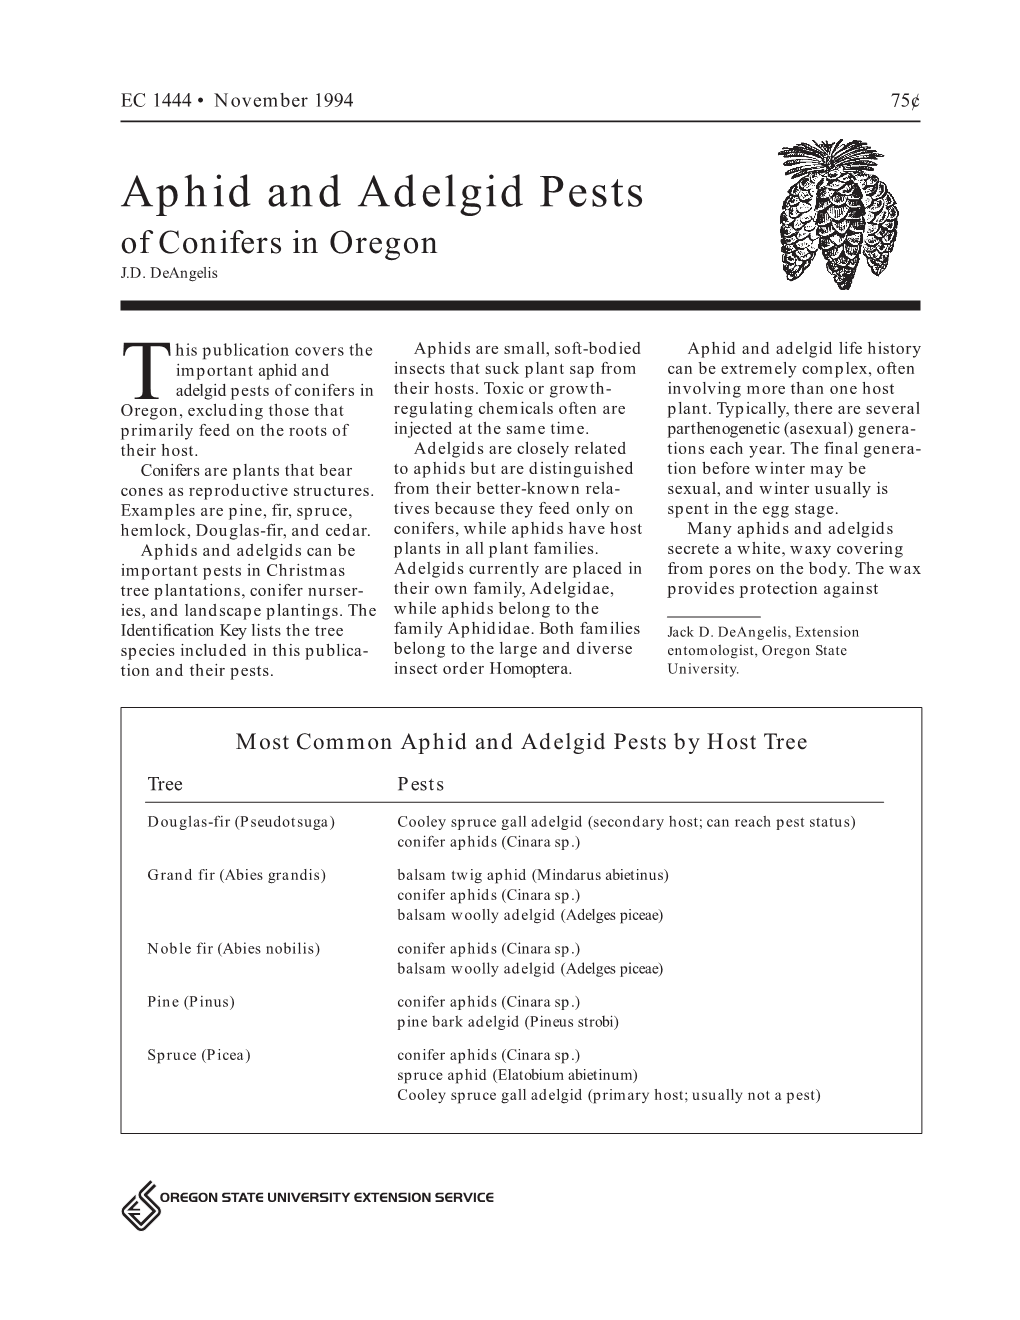 Aphid and Adelgid Pests of Conifers in Oregon J.D